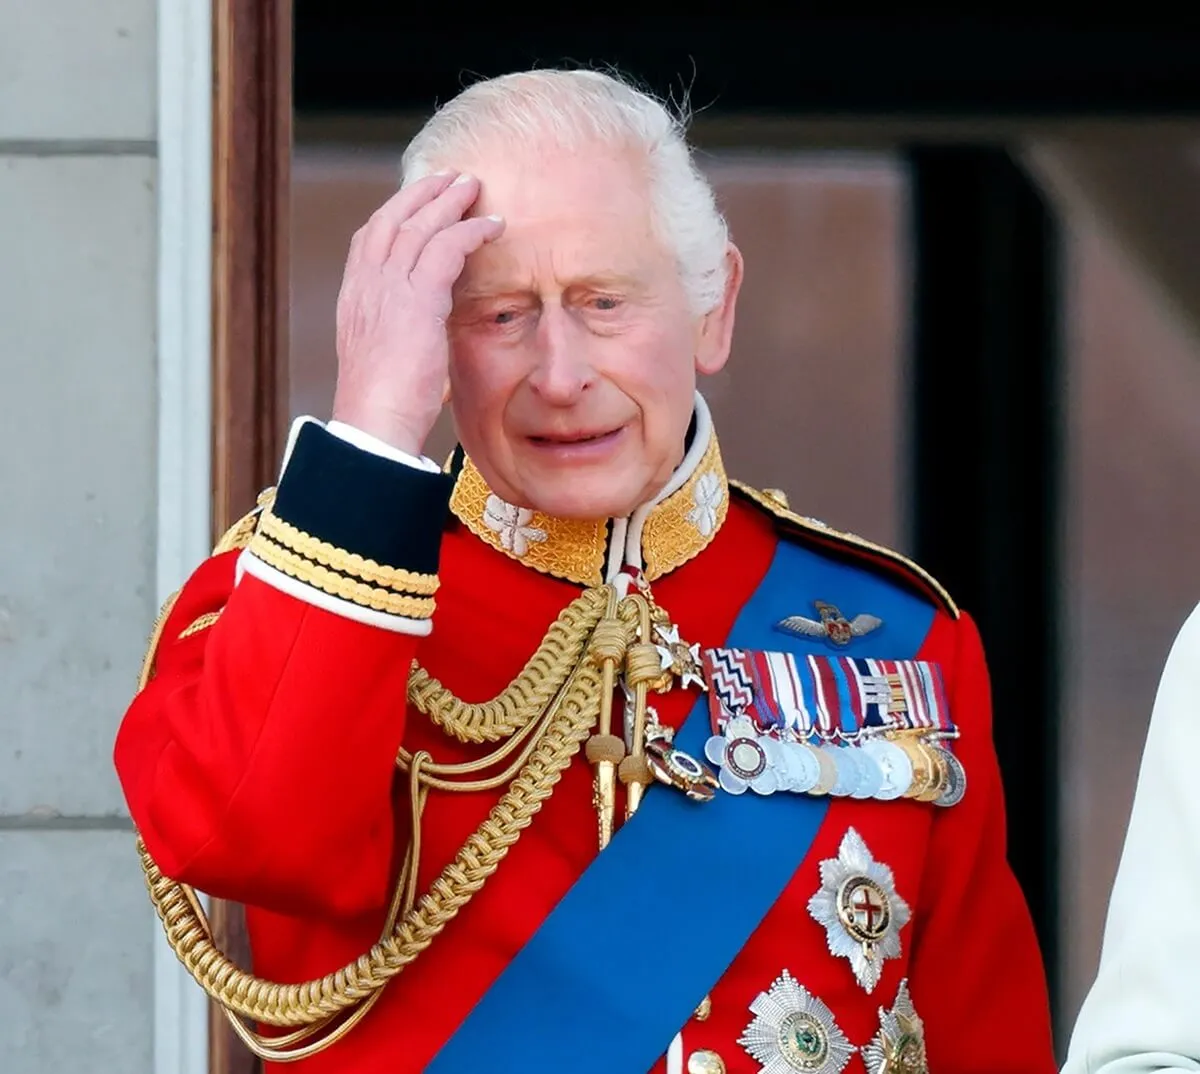 King Charles III, wearing his Irish Guards uniform, standing on the balcony of Buckingham Palace after attending Trooping the Colour